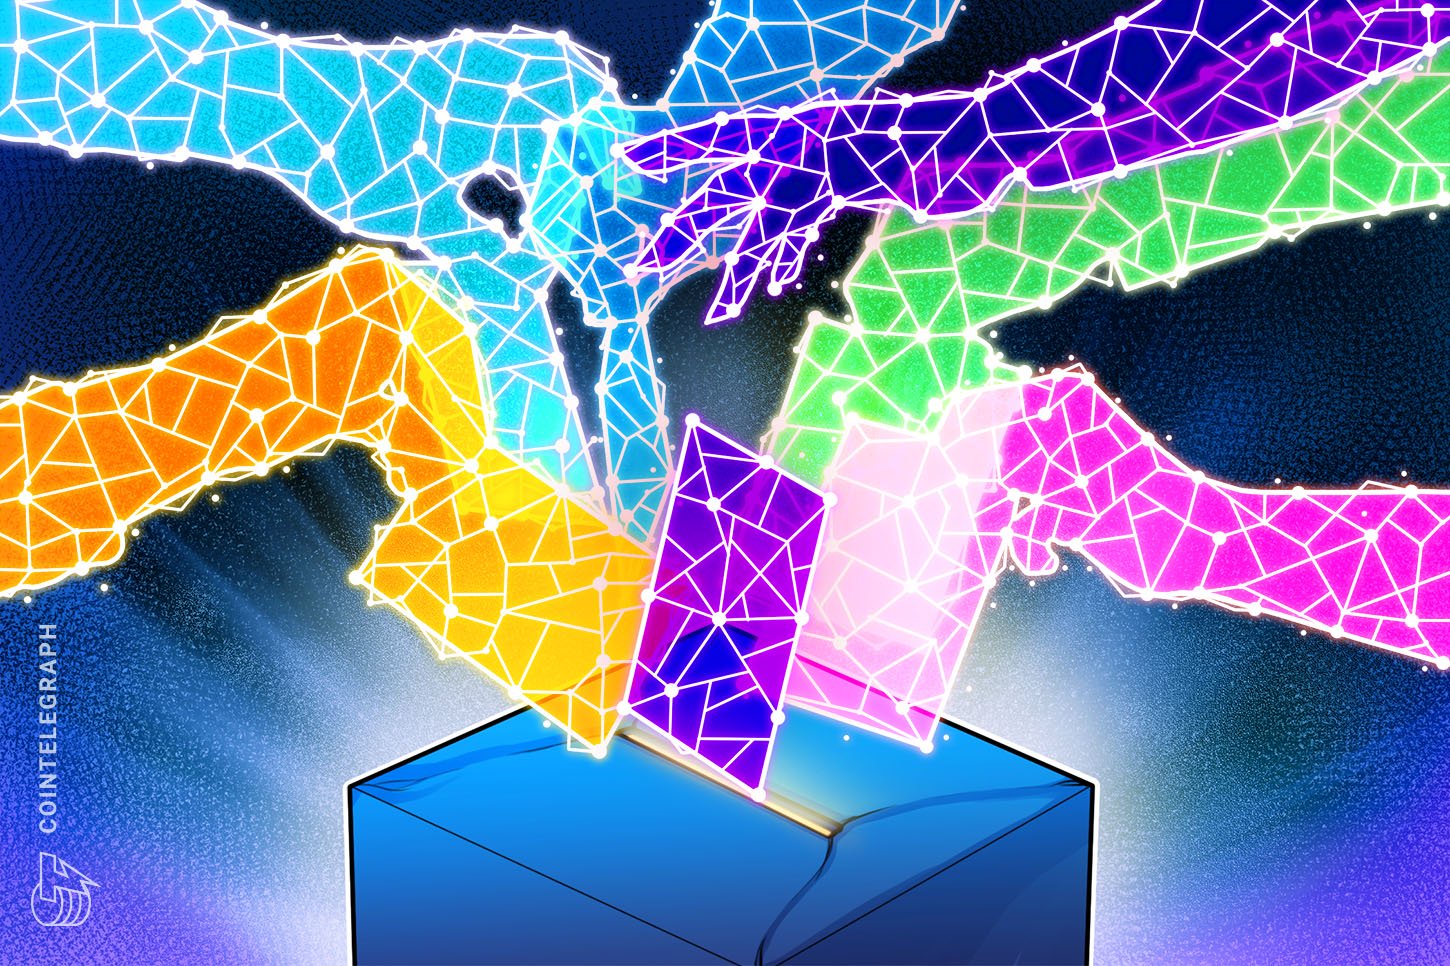 US Congress Considers Blockchain-Based mostly Voting Amid COVID-19